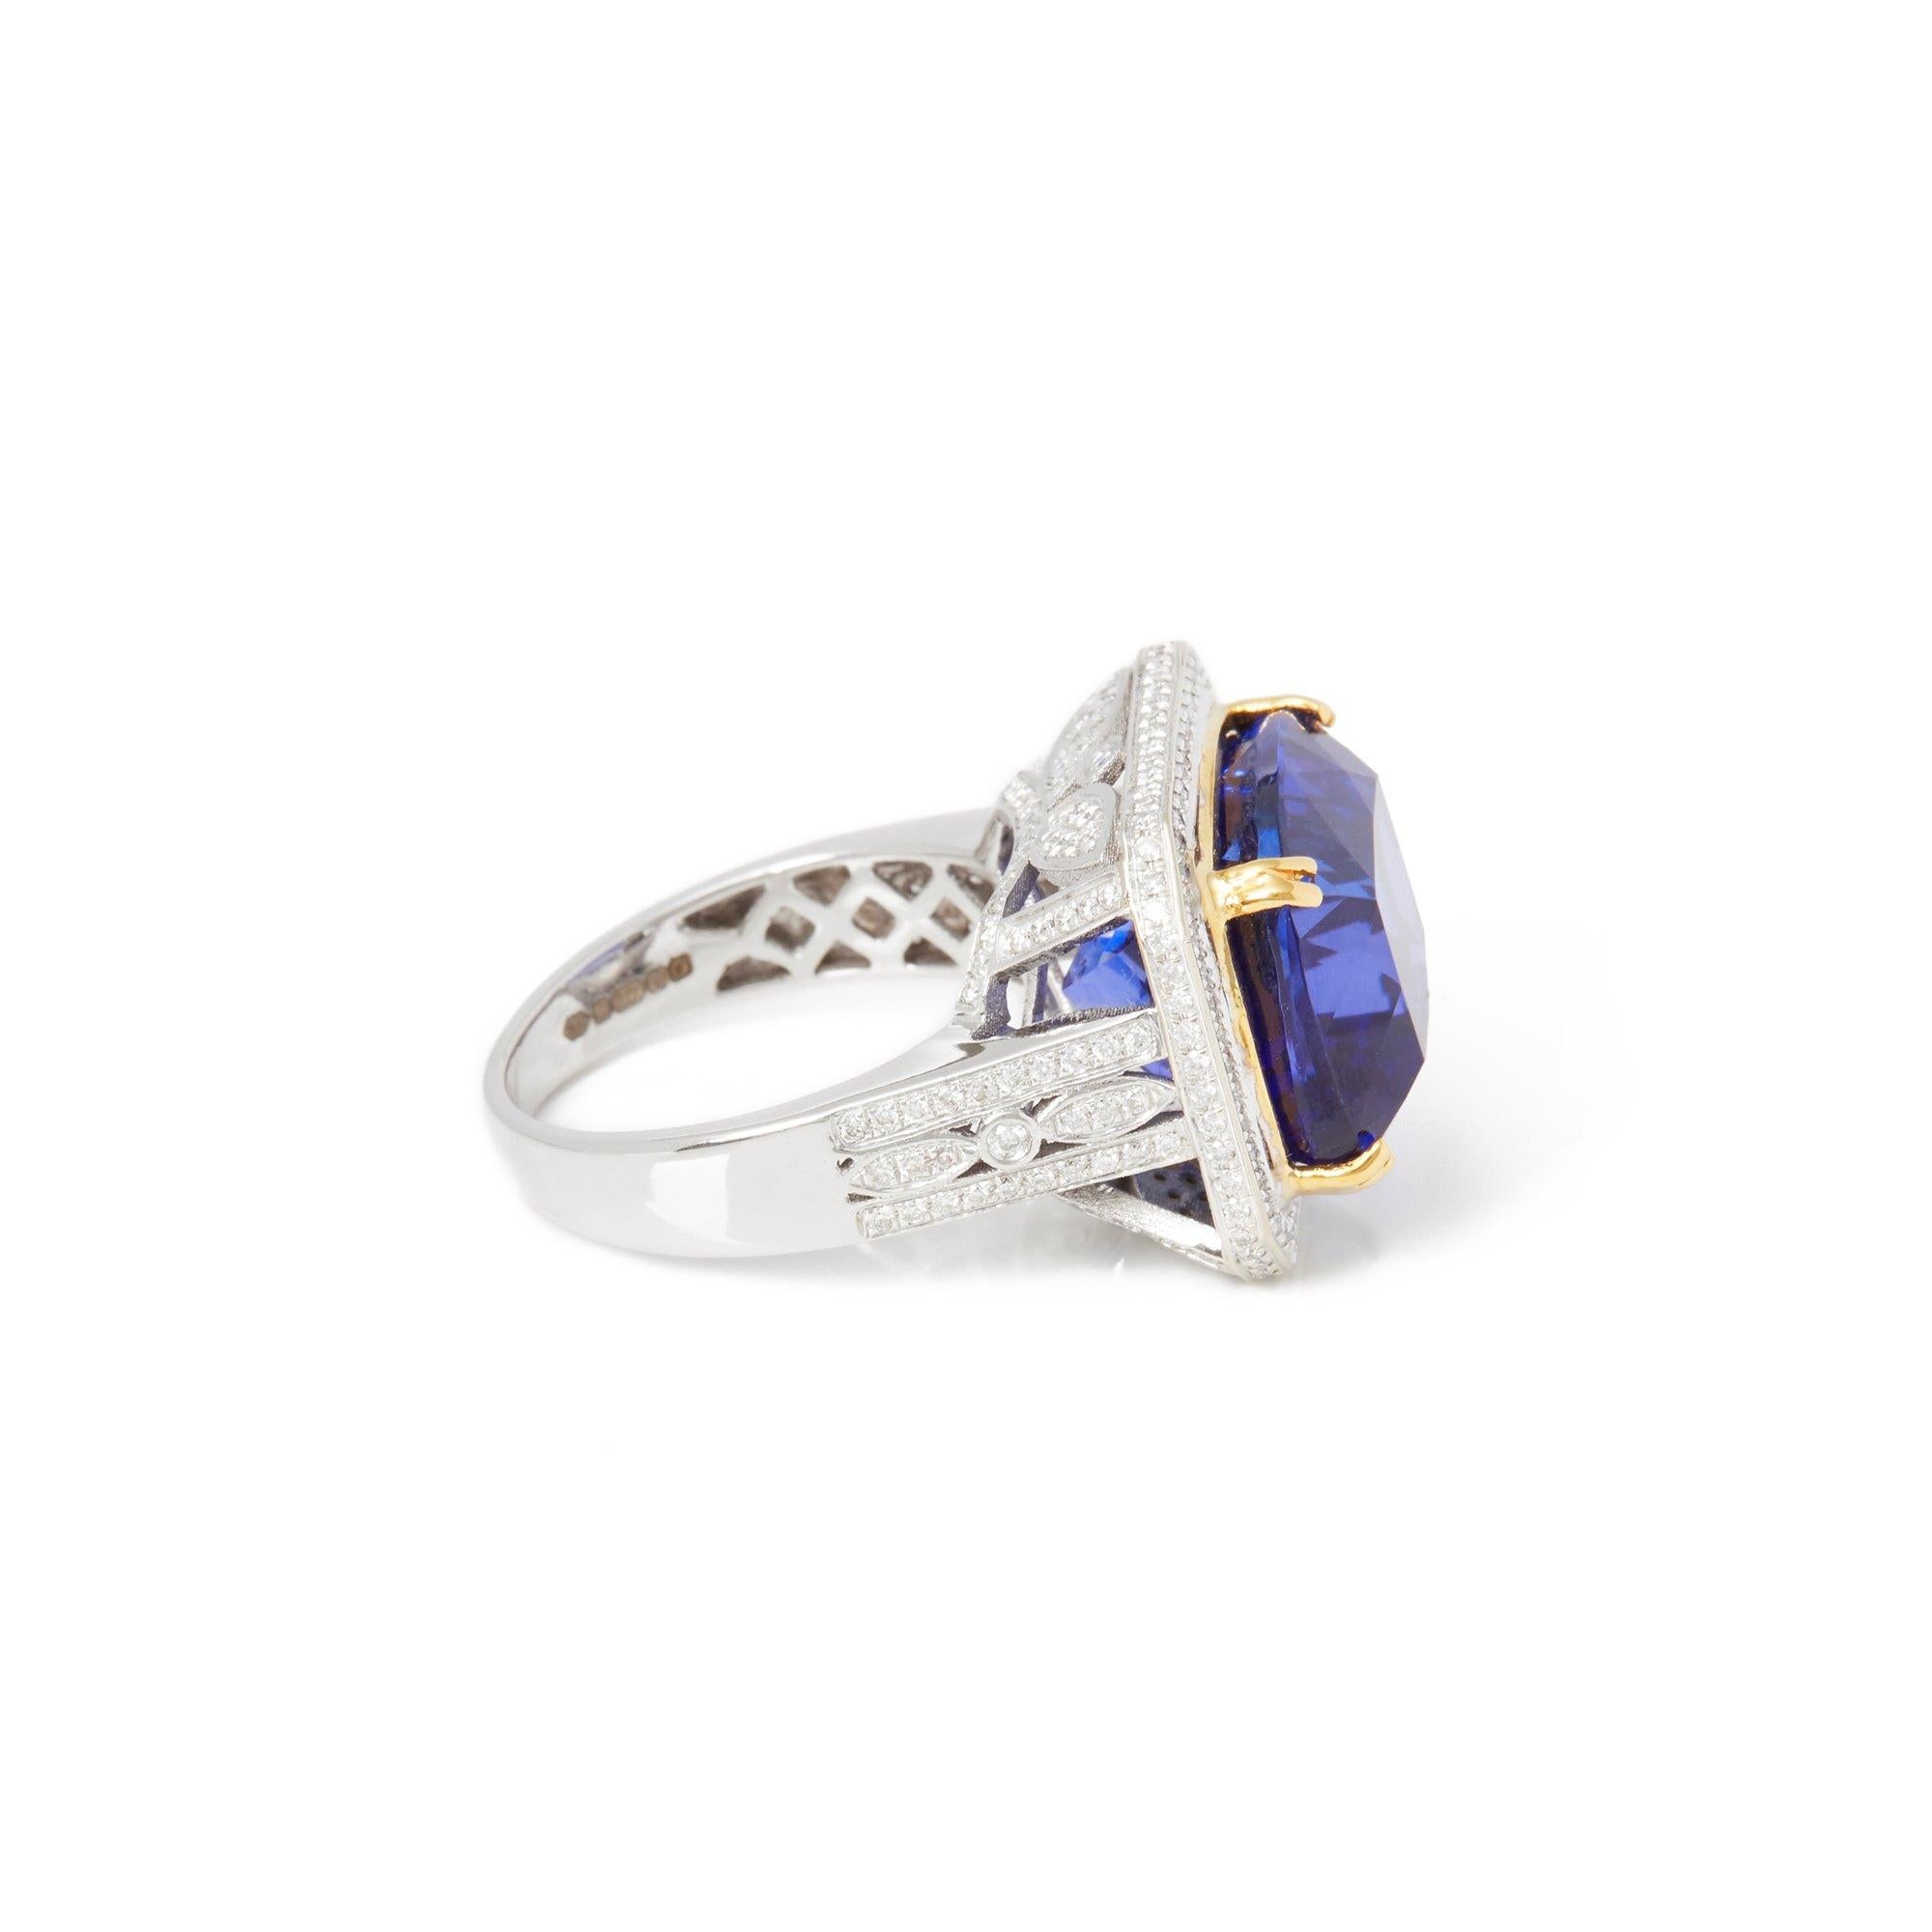 This ring designed by David Jerome is from his private collection and features one cushion cut Tanzanite totalling 15.20cts sourced in the D block mine Tanzania. Set with round brilliant cut Diamonds totalling 1.04cts mounted in an 18k white gold